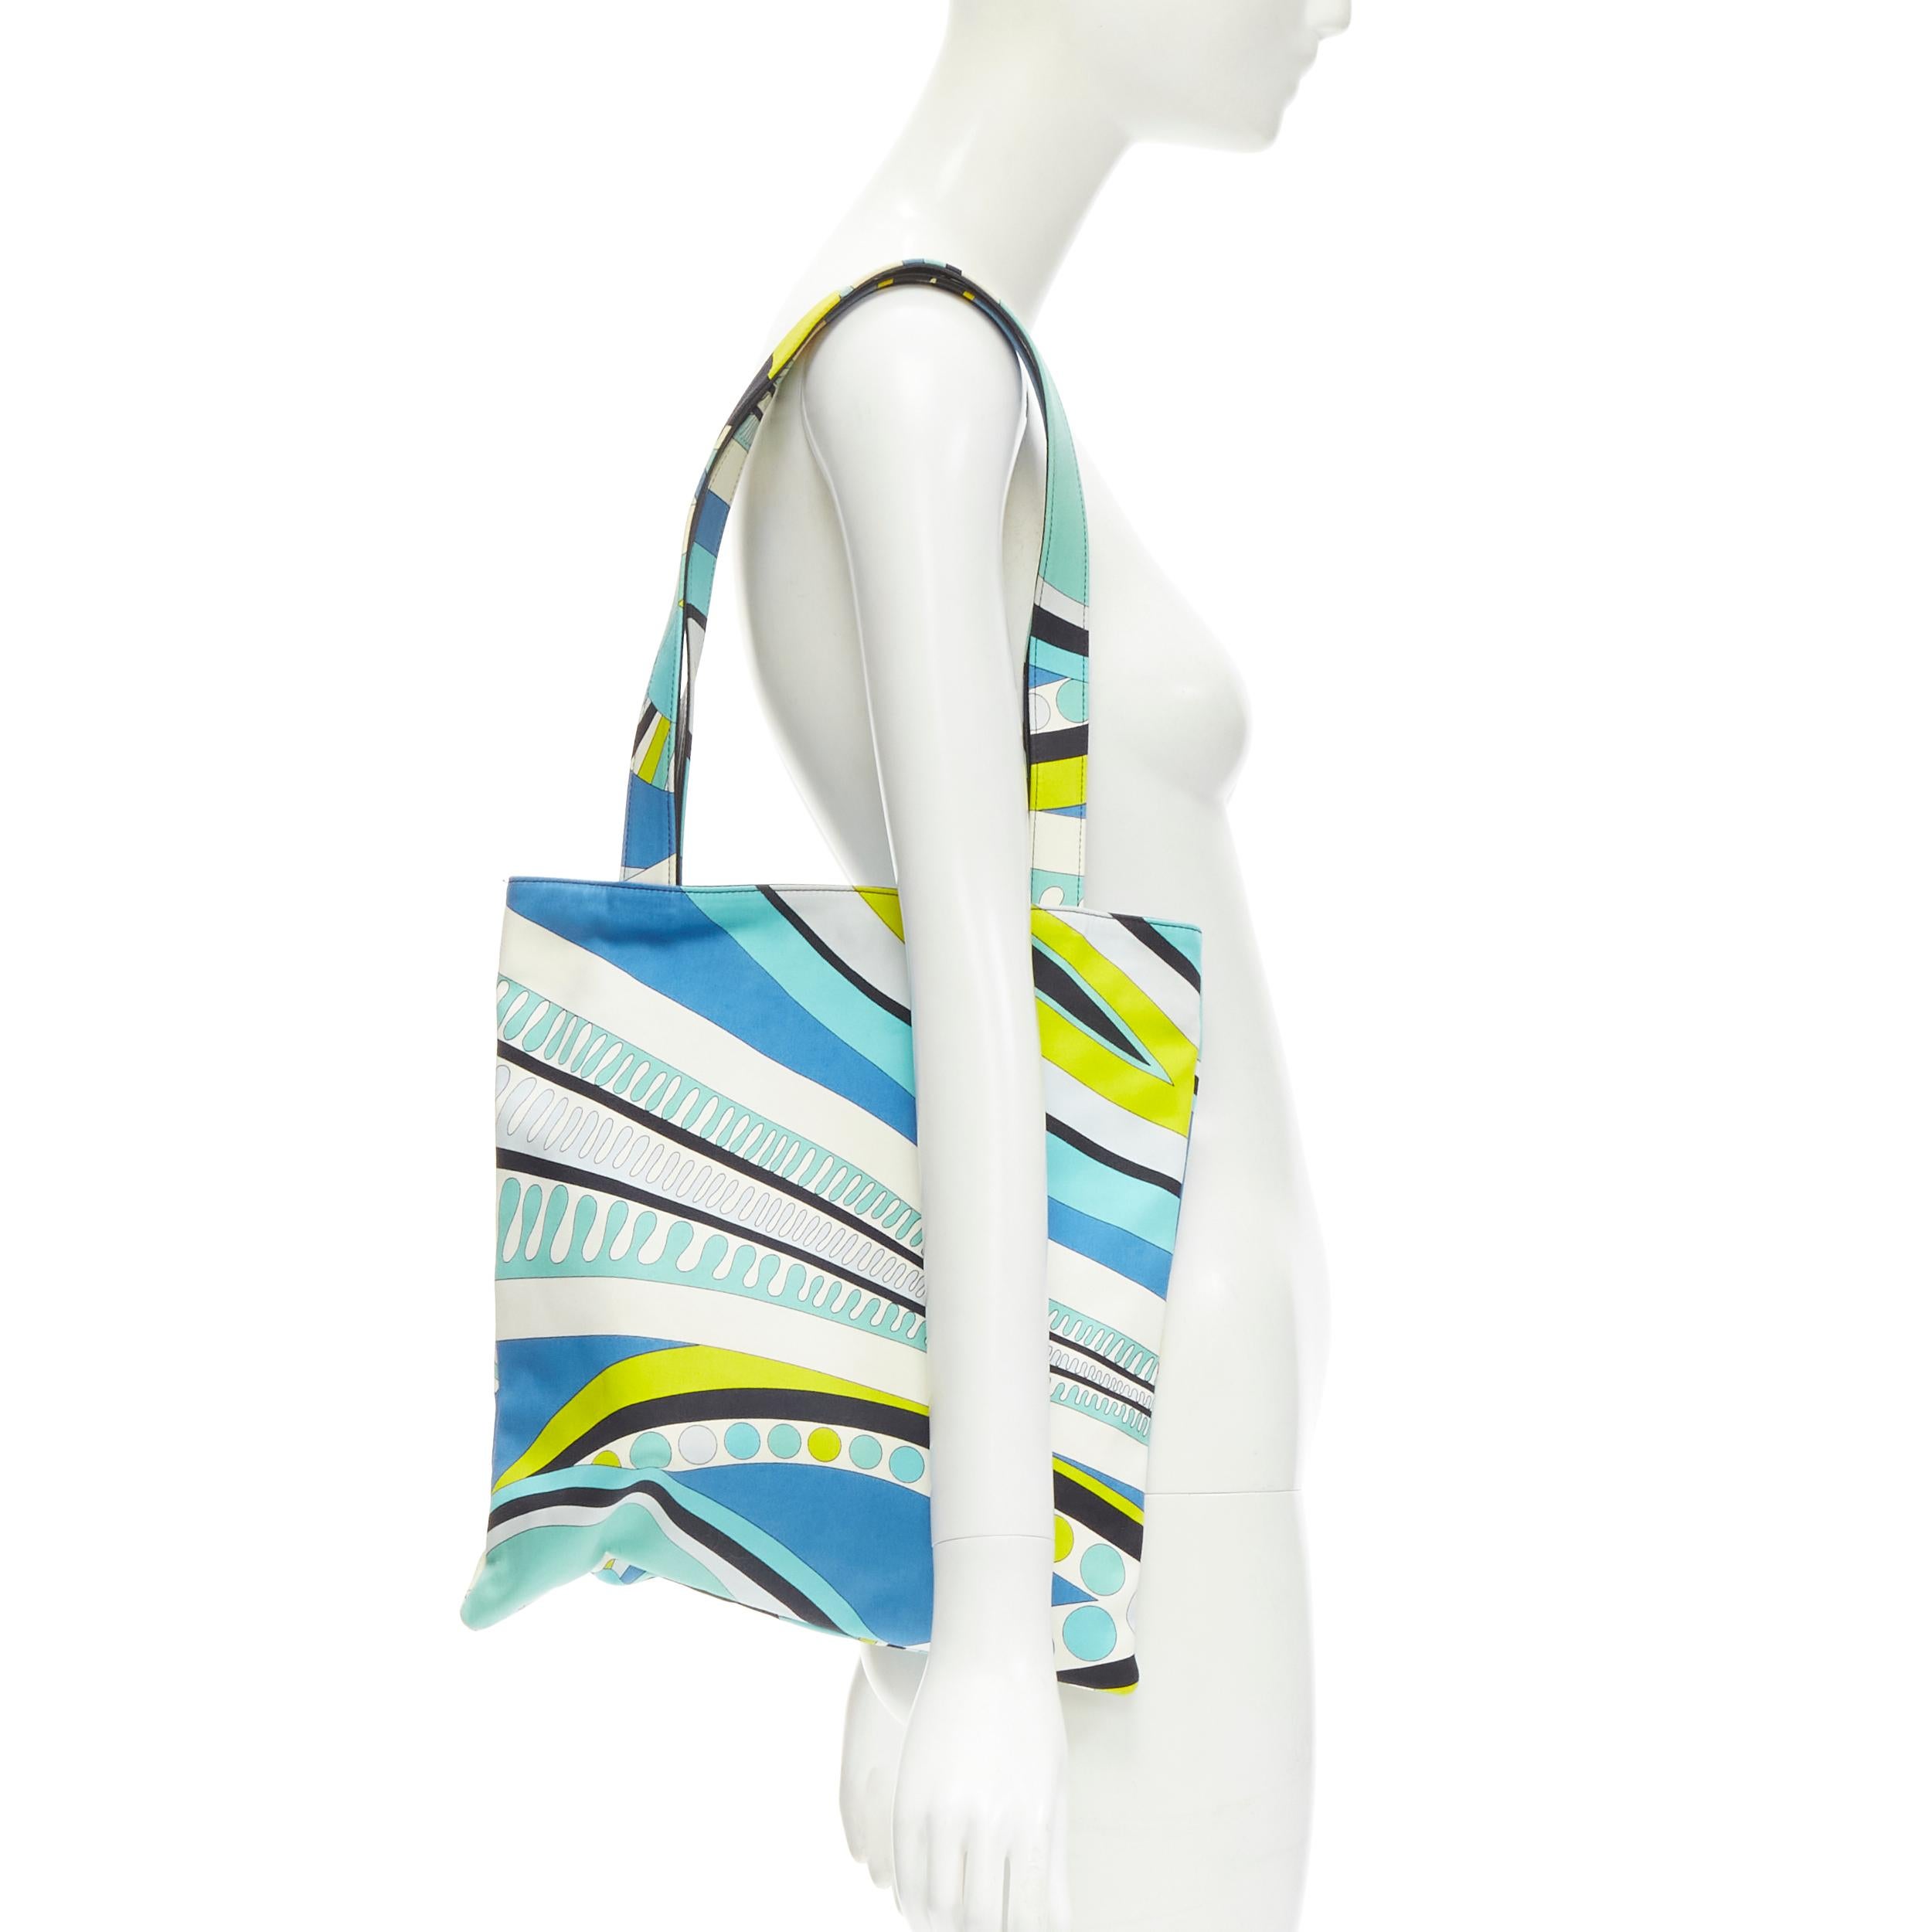 EMILIO PUCCI Onde Nuages print blue yellow leather trim handle tote bag
Brand: Emilio Pucci
Material: Cotton
Color: Blue
Pattern: Abstract
Closure: Zip
Extra Detail: Leather trim on handle. Magnetic button at top. Zip wall pocket.
Made in: